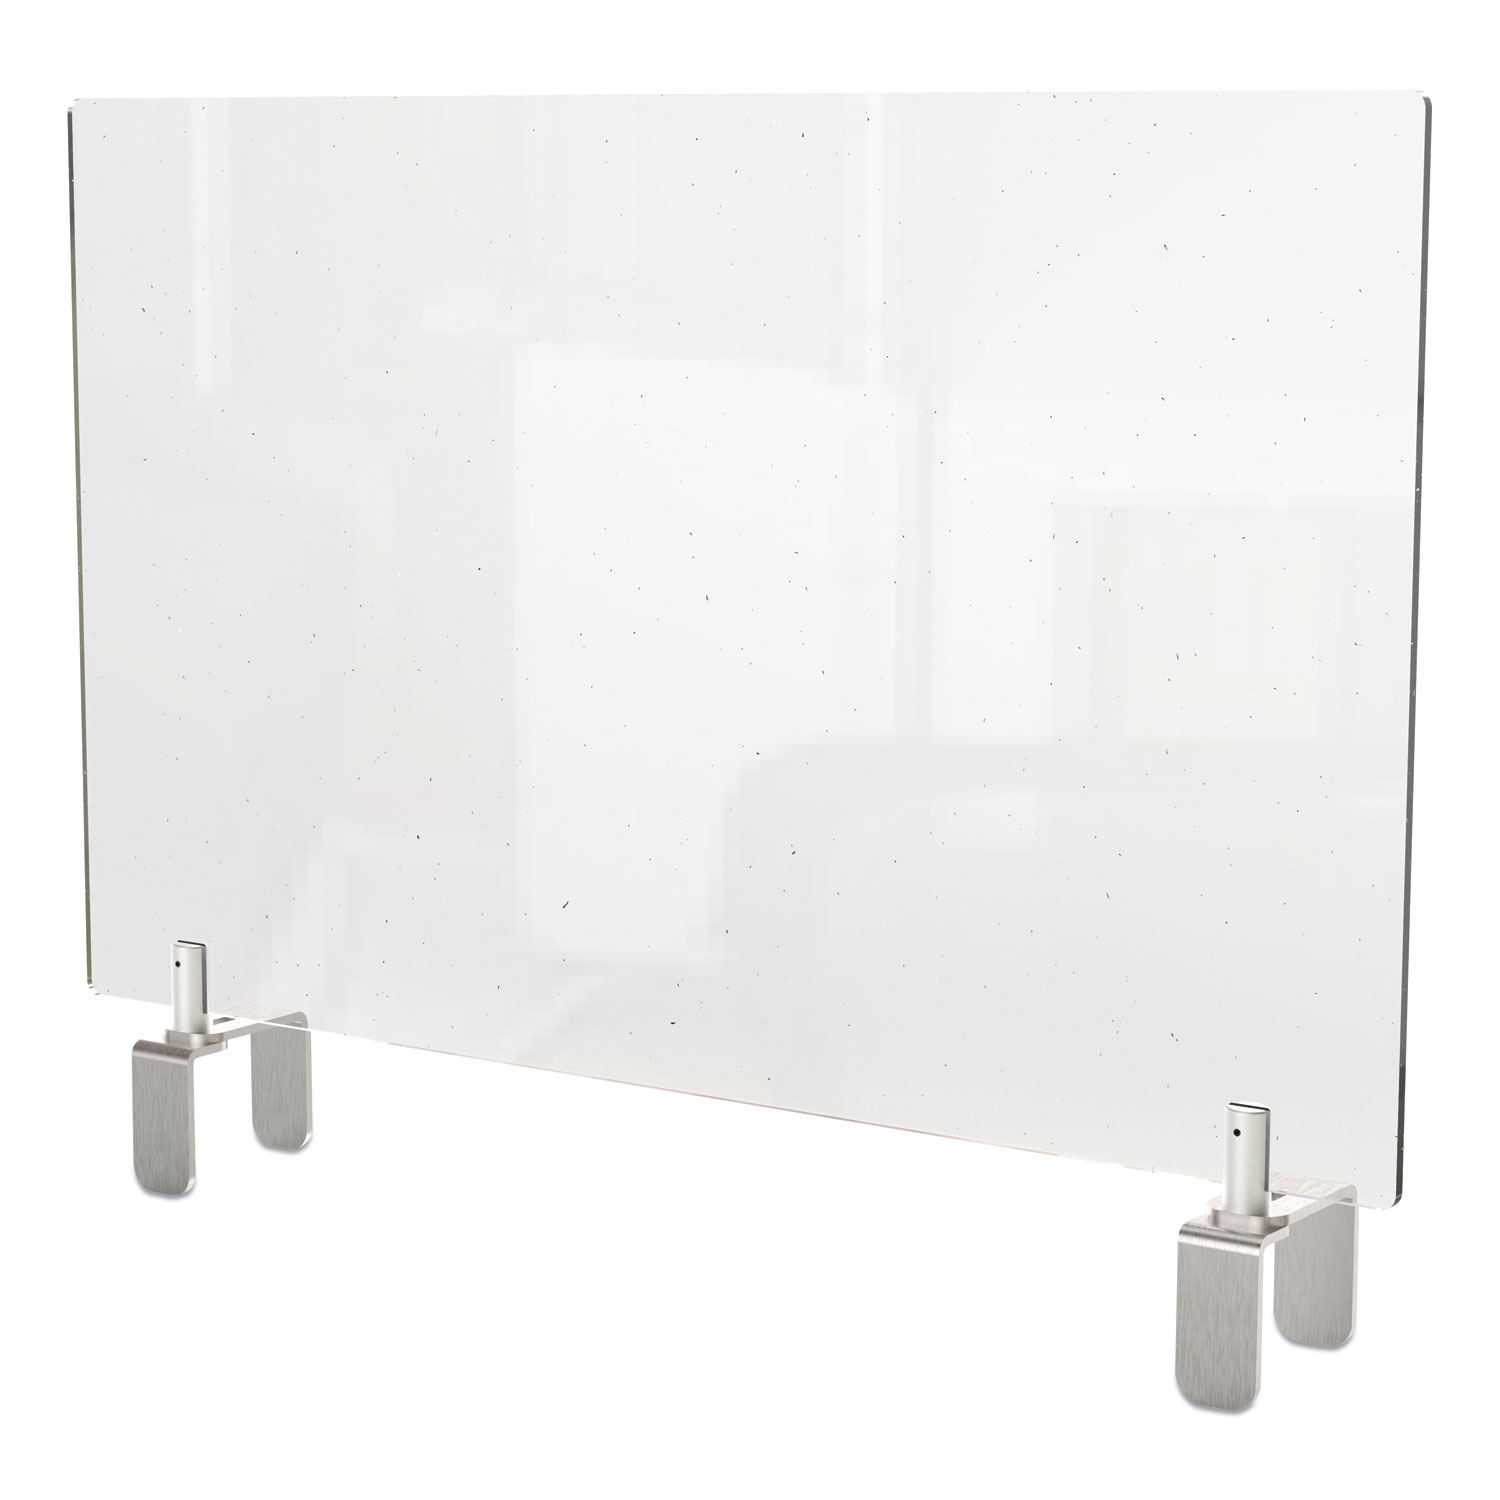  Ghent PEC1842-A Clear Partition Extender with Attached Clamp, 42 x 3.88 x 18, Thermoplastic Sheeting (GHEPEC1842A) 